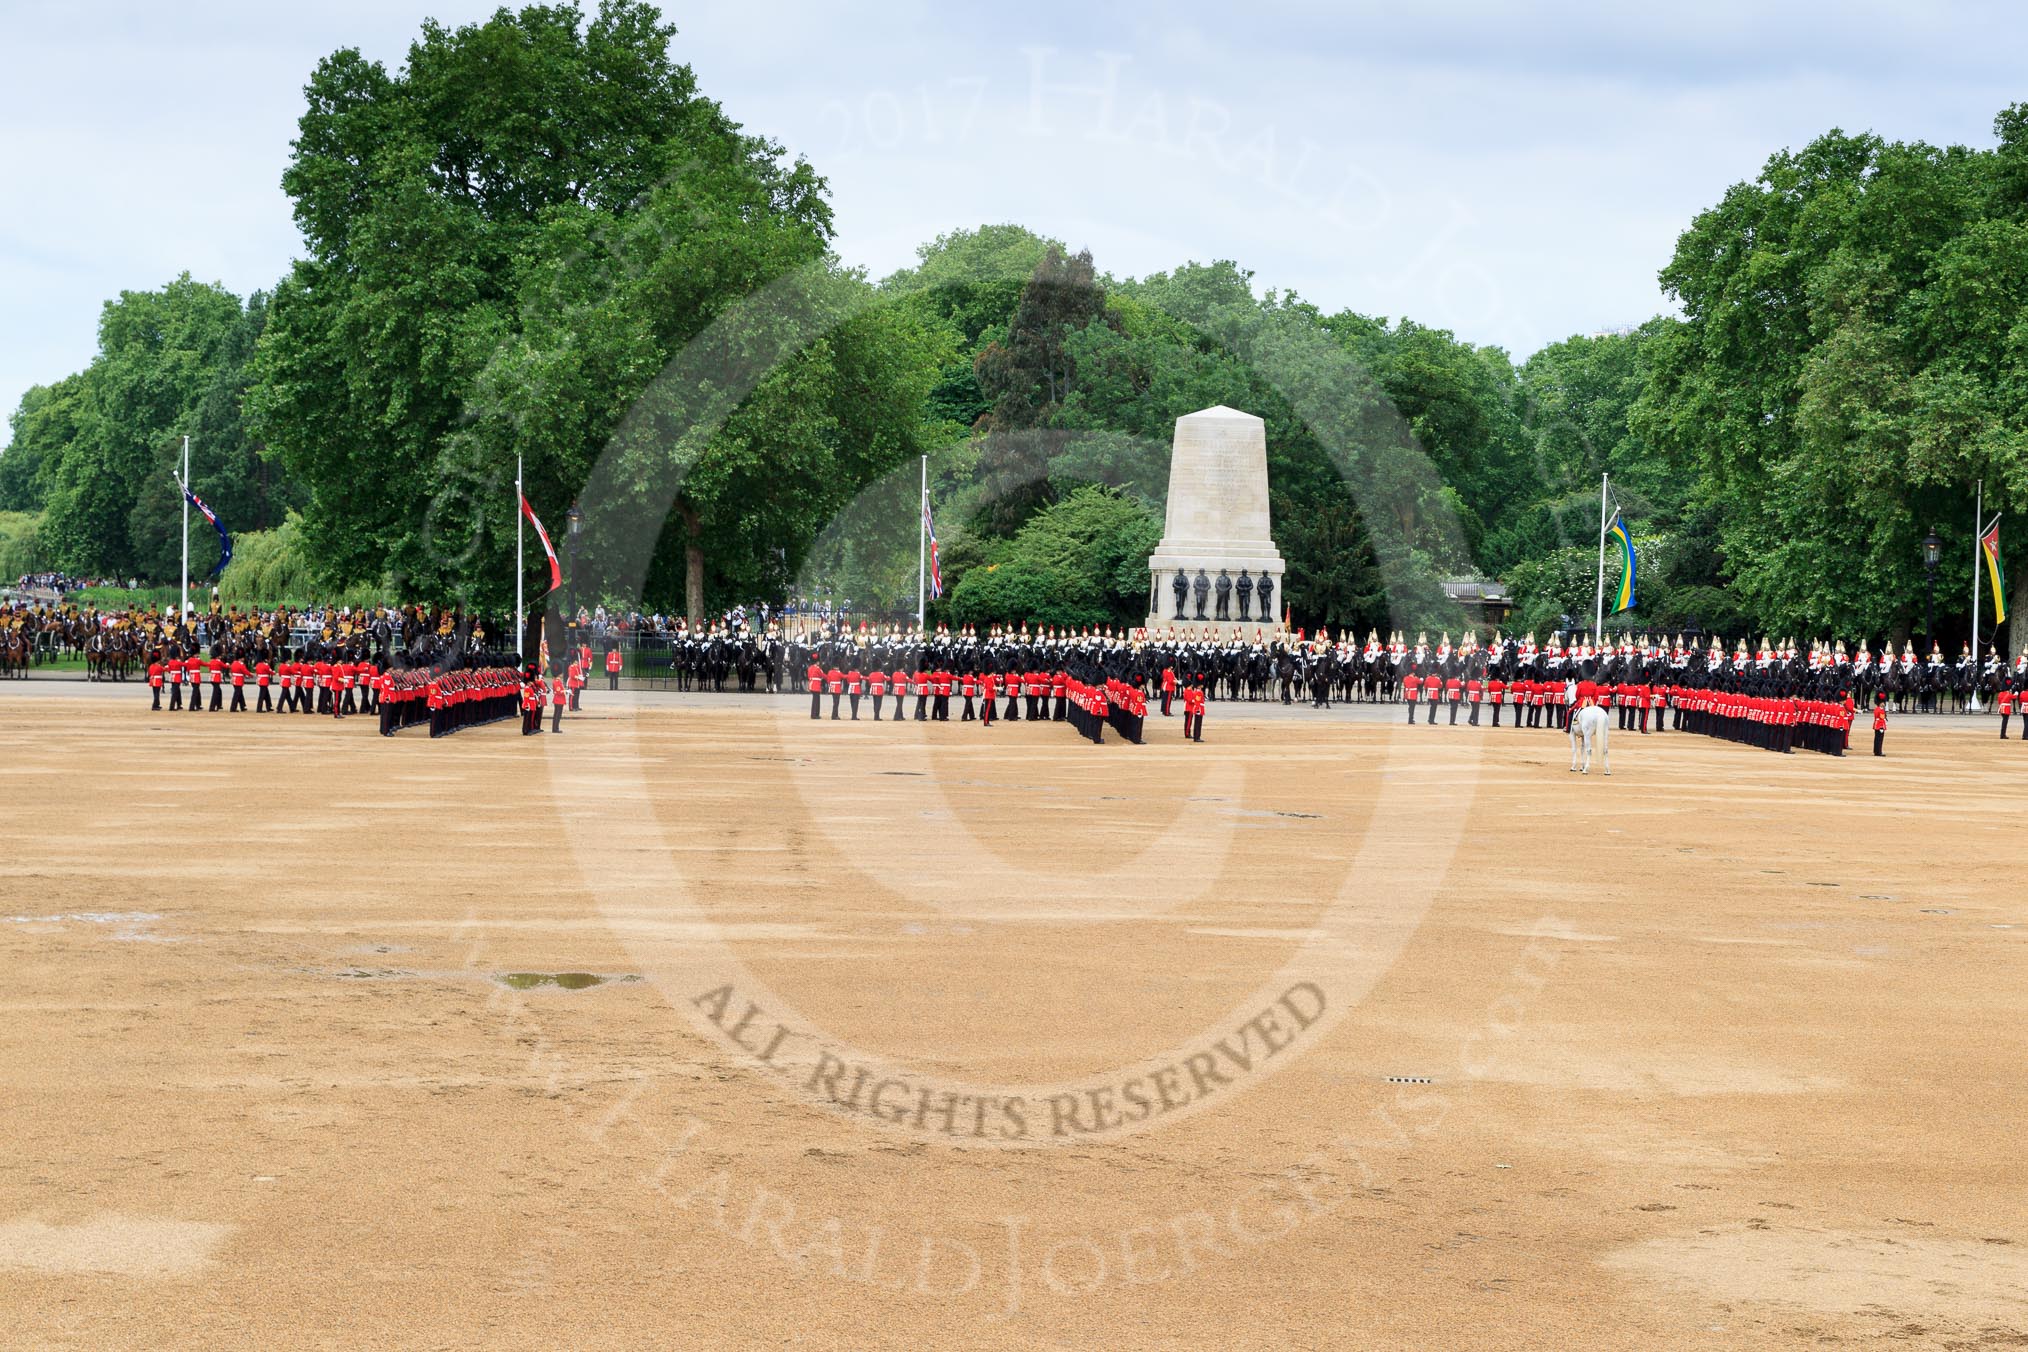 during The Colonel's Review {iptcyear4} (final rehearsal for Trooping the Colour, The Queen's Birthday Parade)  at Horse Guards Parade, Westminster, London, 2 June 2018, 11:31.